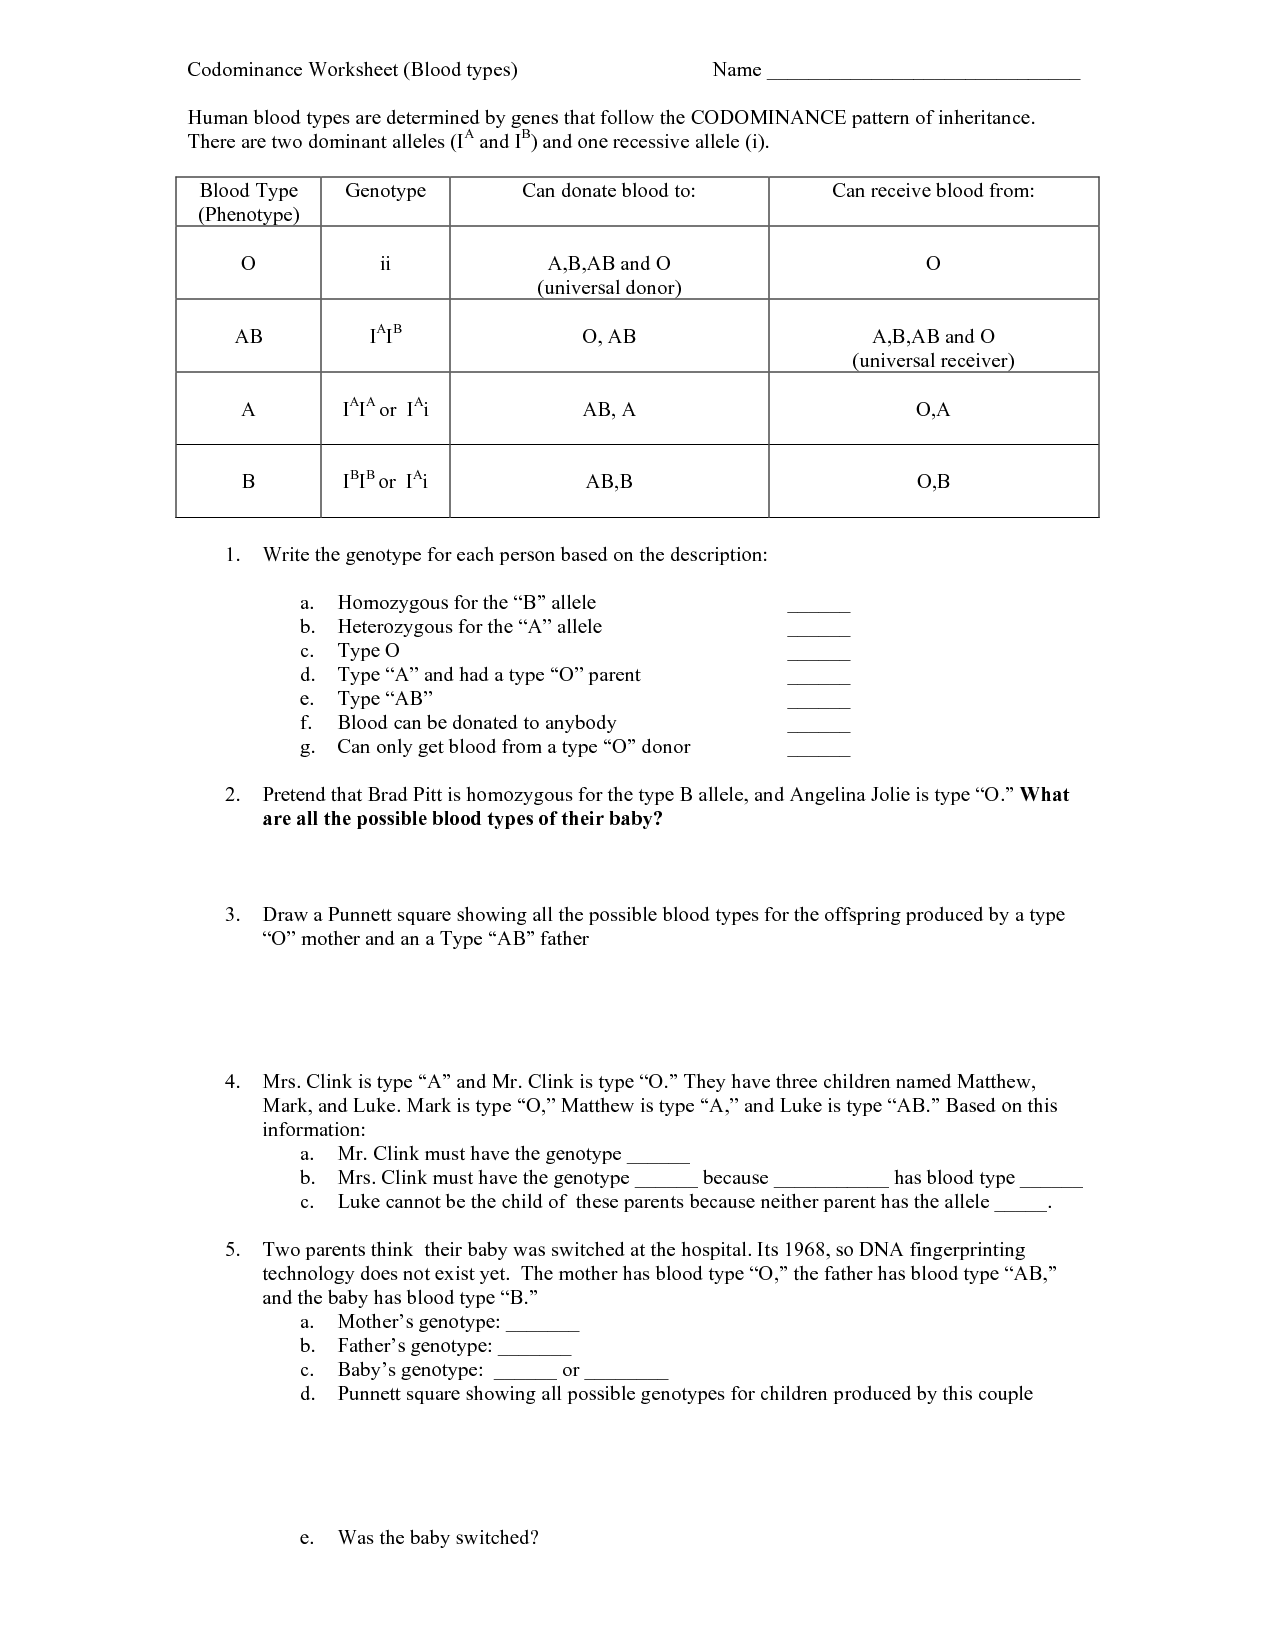 16 Best Images Of Blood Type Worksheet Answer Key Codominance Worksheet Blood Types Blood 